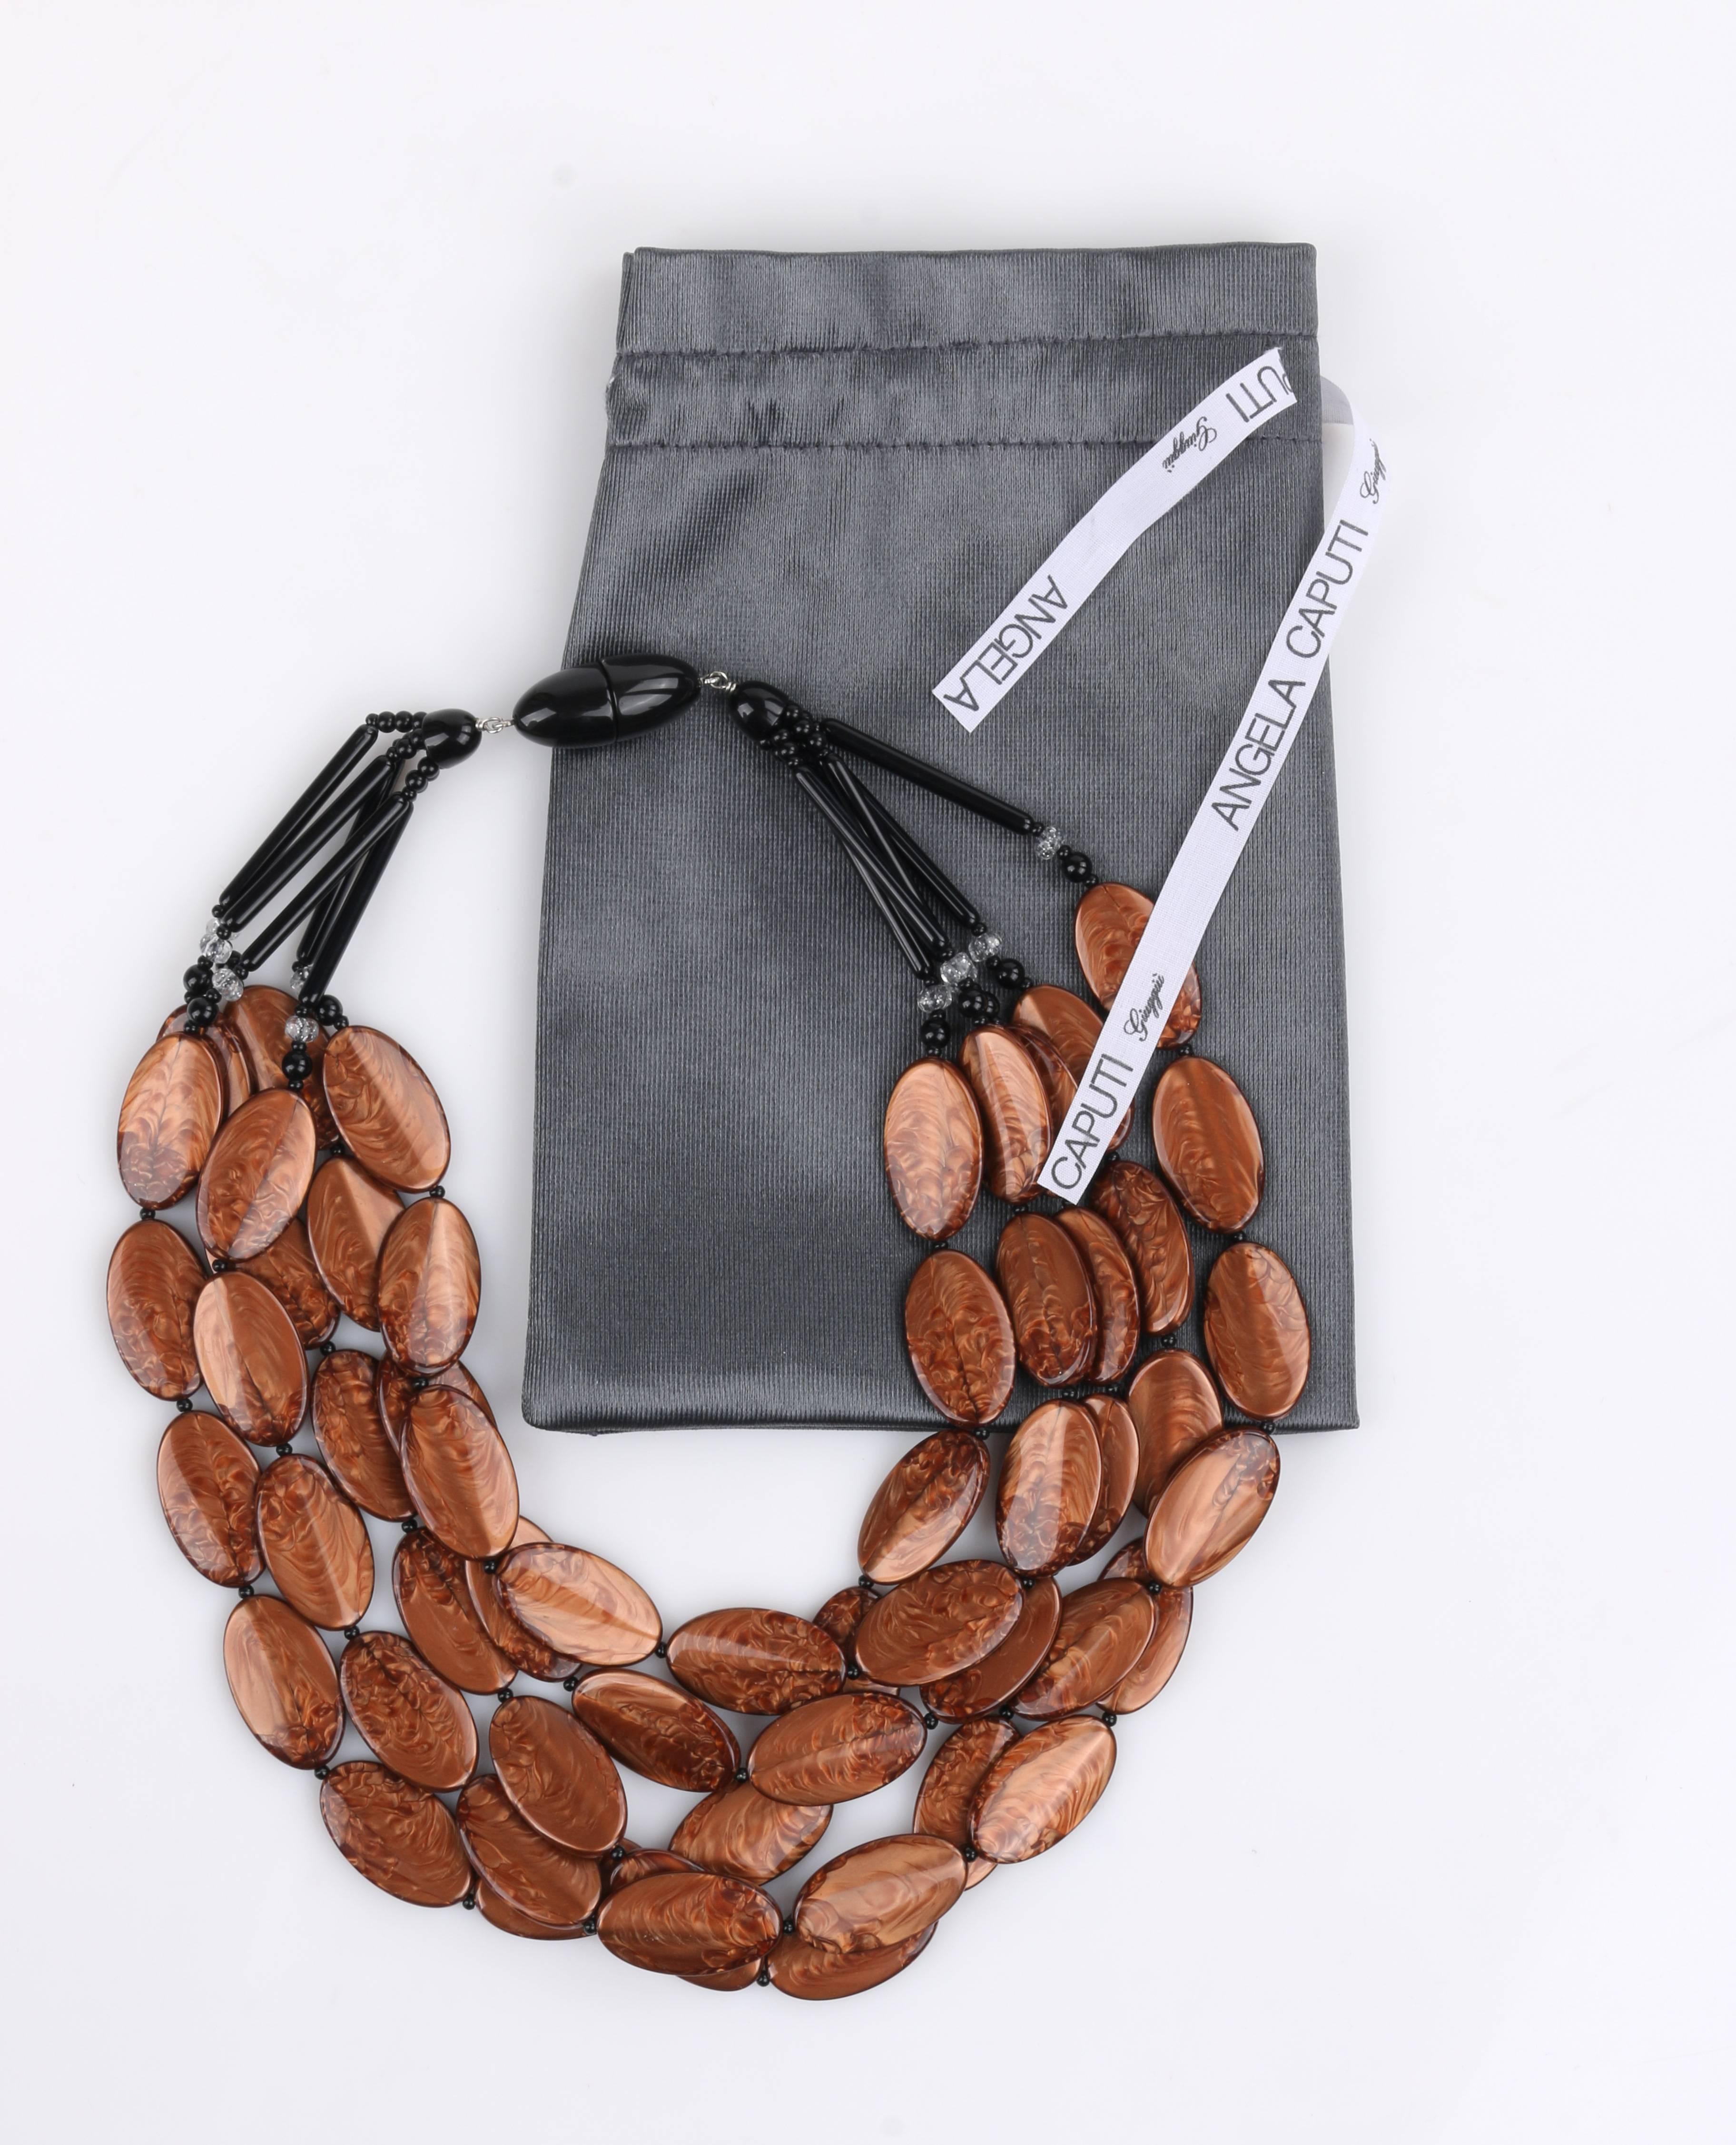 Angela Caputi Giuggui copper lucite like resin oval beaded multi-strand statement bib necklace. Five beaded strands made up of marbleized oval resin beads with black seed bead spacers at front of necklace. Each strand has black polished spherical